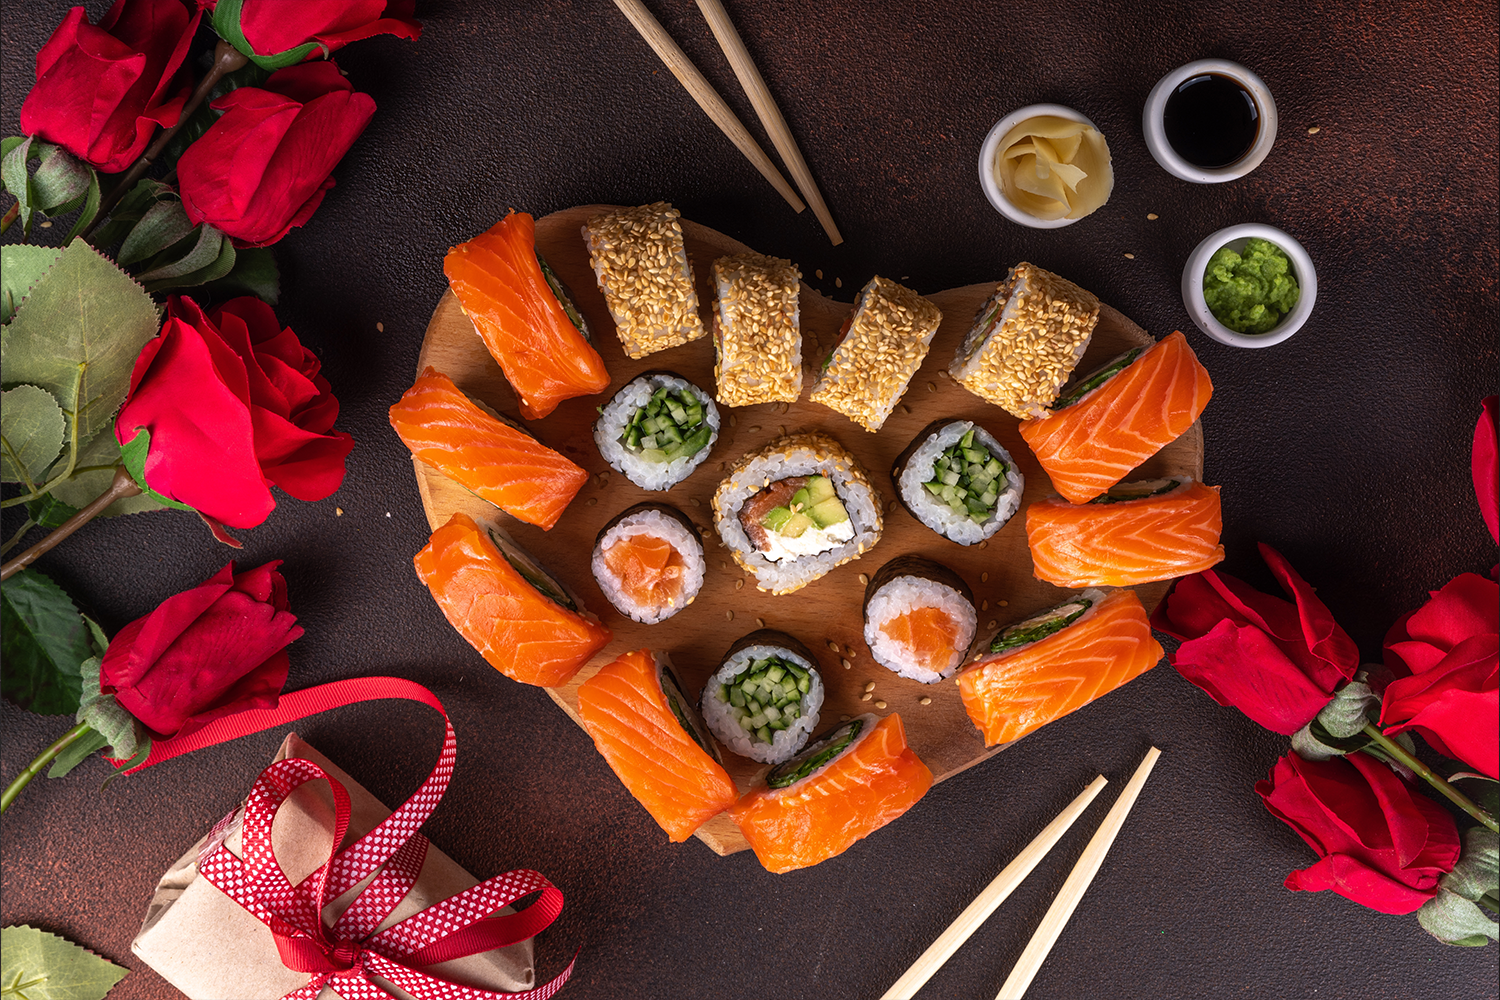 A plate of sushi shaped into a heart on a wooden table next to roses.